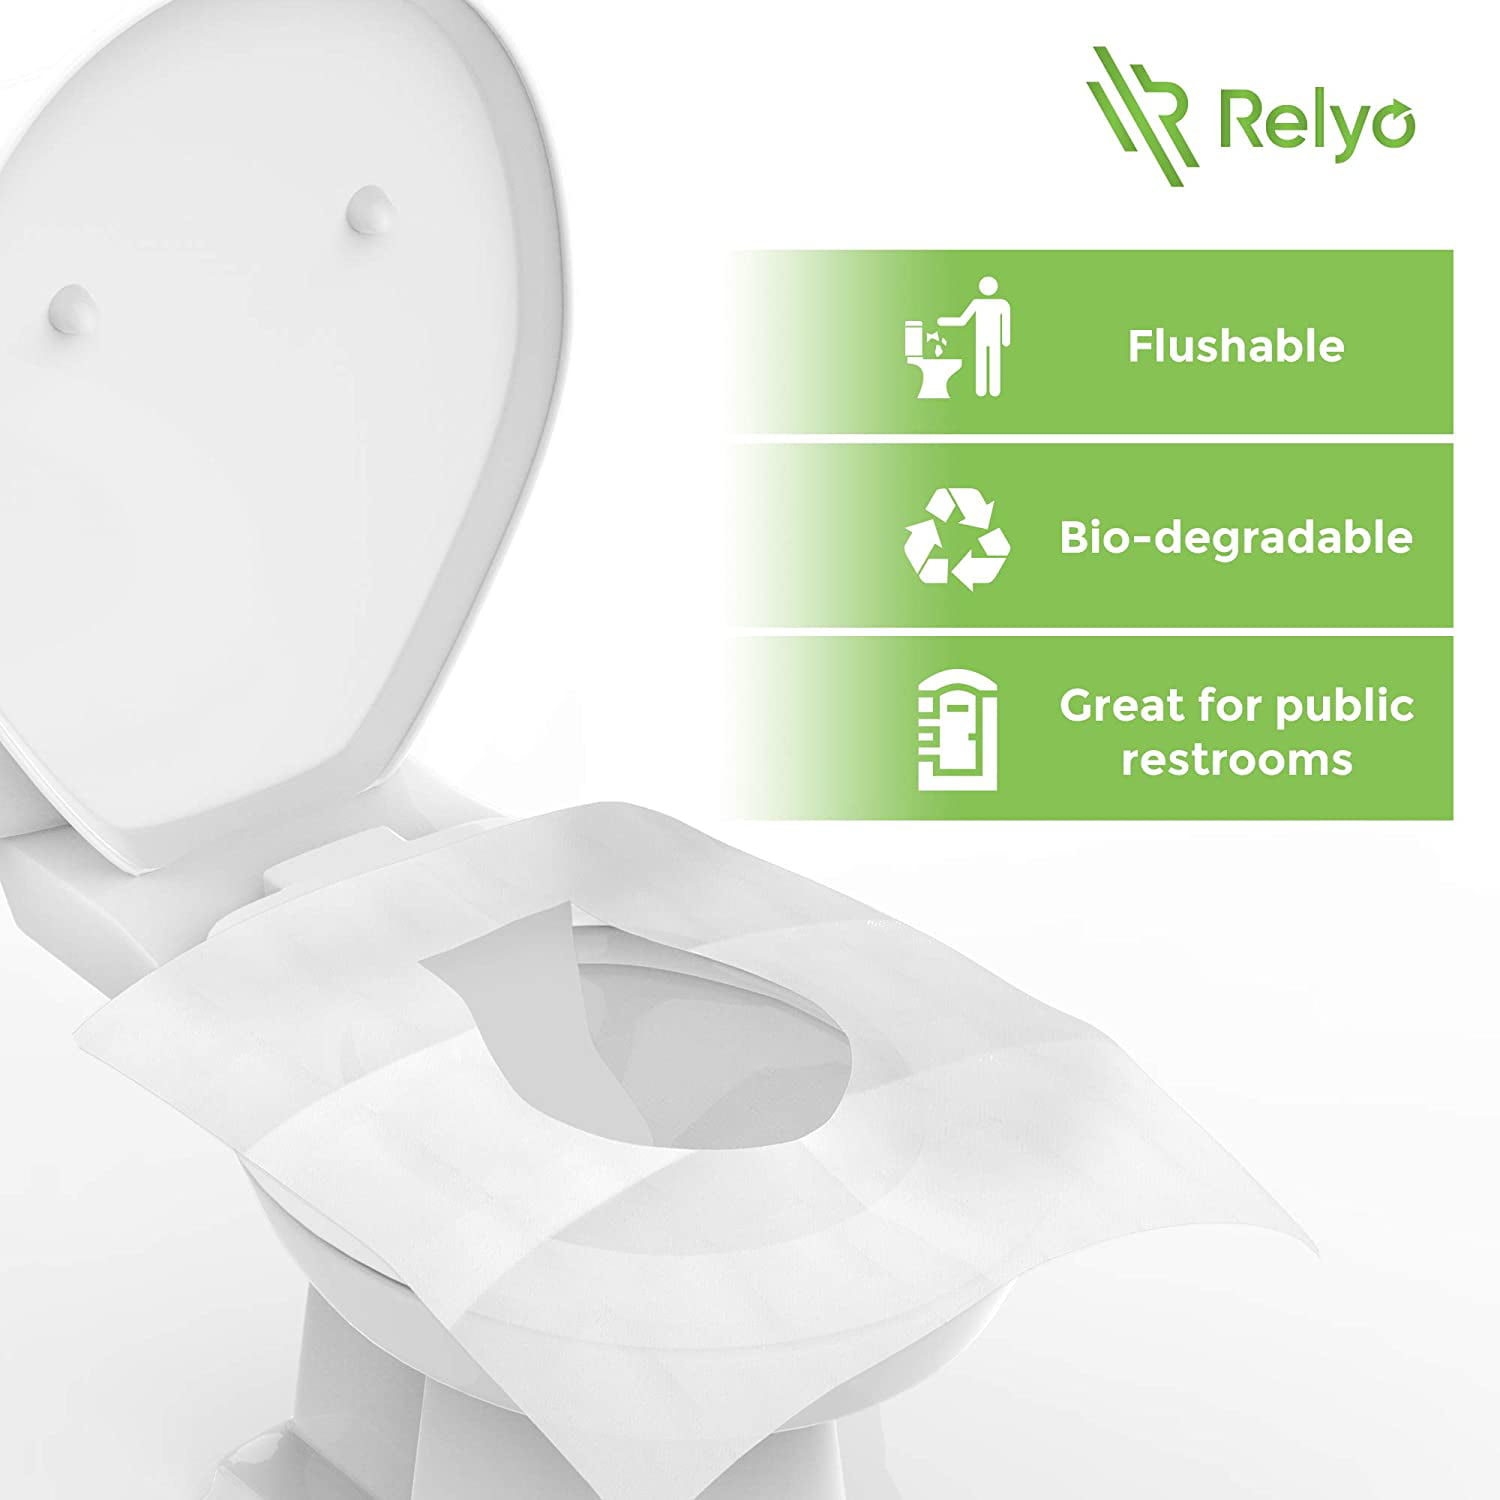 L,56x42cm,22x16.5 inch FYY 50 Pack Toilet Seat Covers Paper Flushable,Travel Disposable Flushable Paper Toilet Seat Covers for Adults and Kids Potty Training in Public Restrooms,Airplane,Camping 